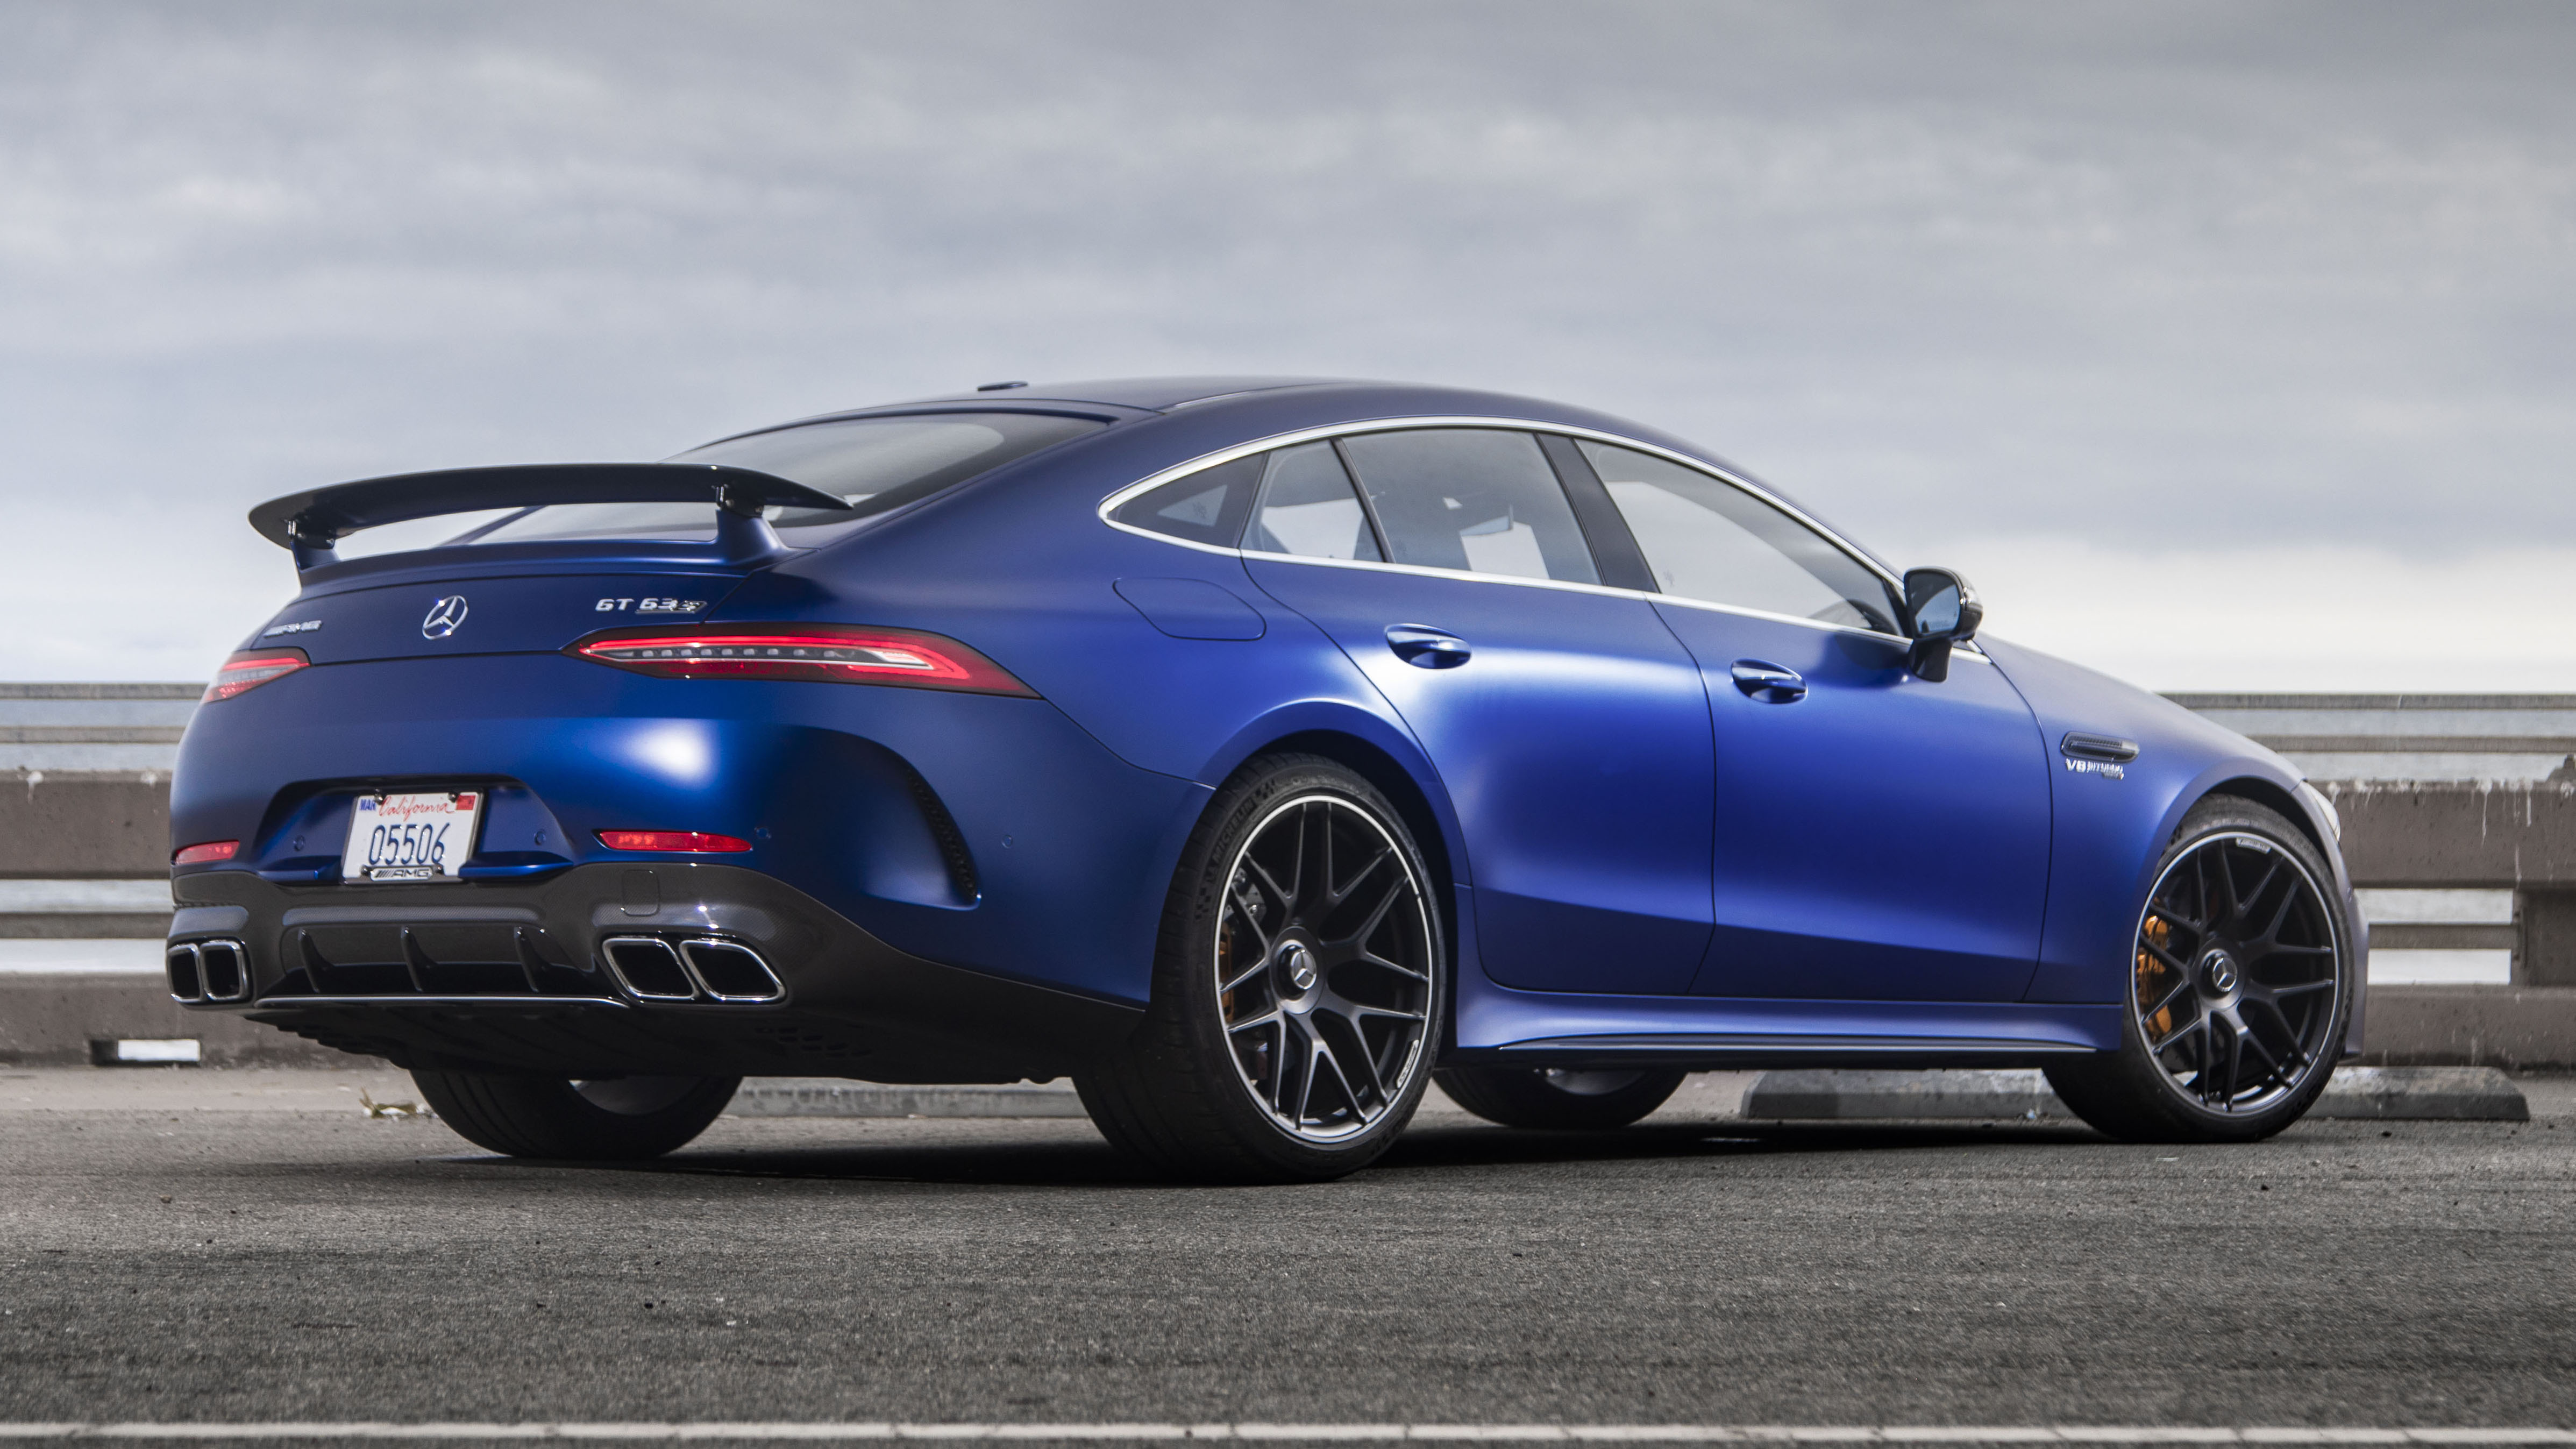 2019-mercedes-amg-gt-63-s-4-door-review-performance-handling-and